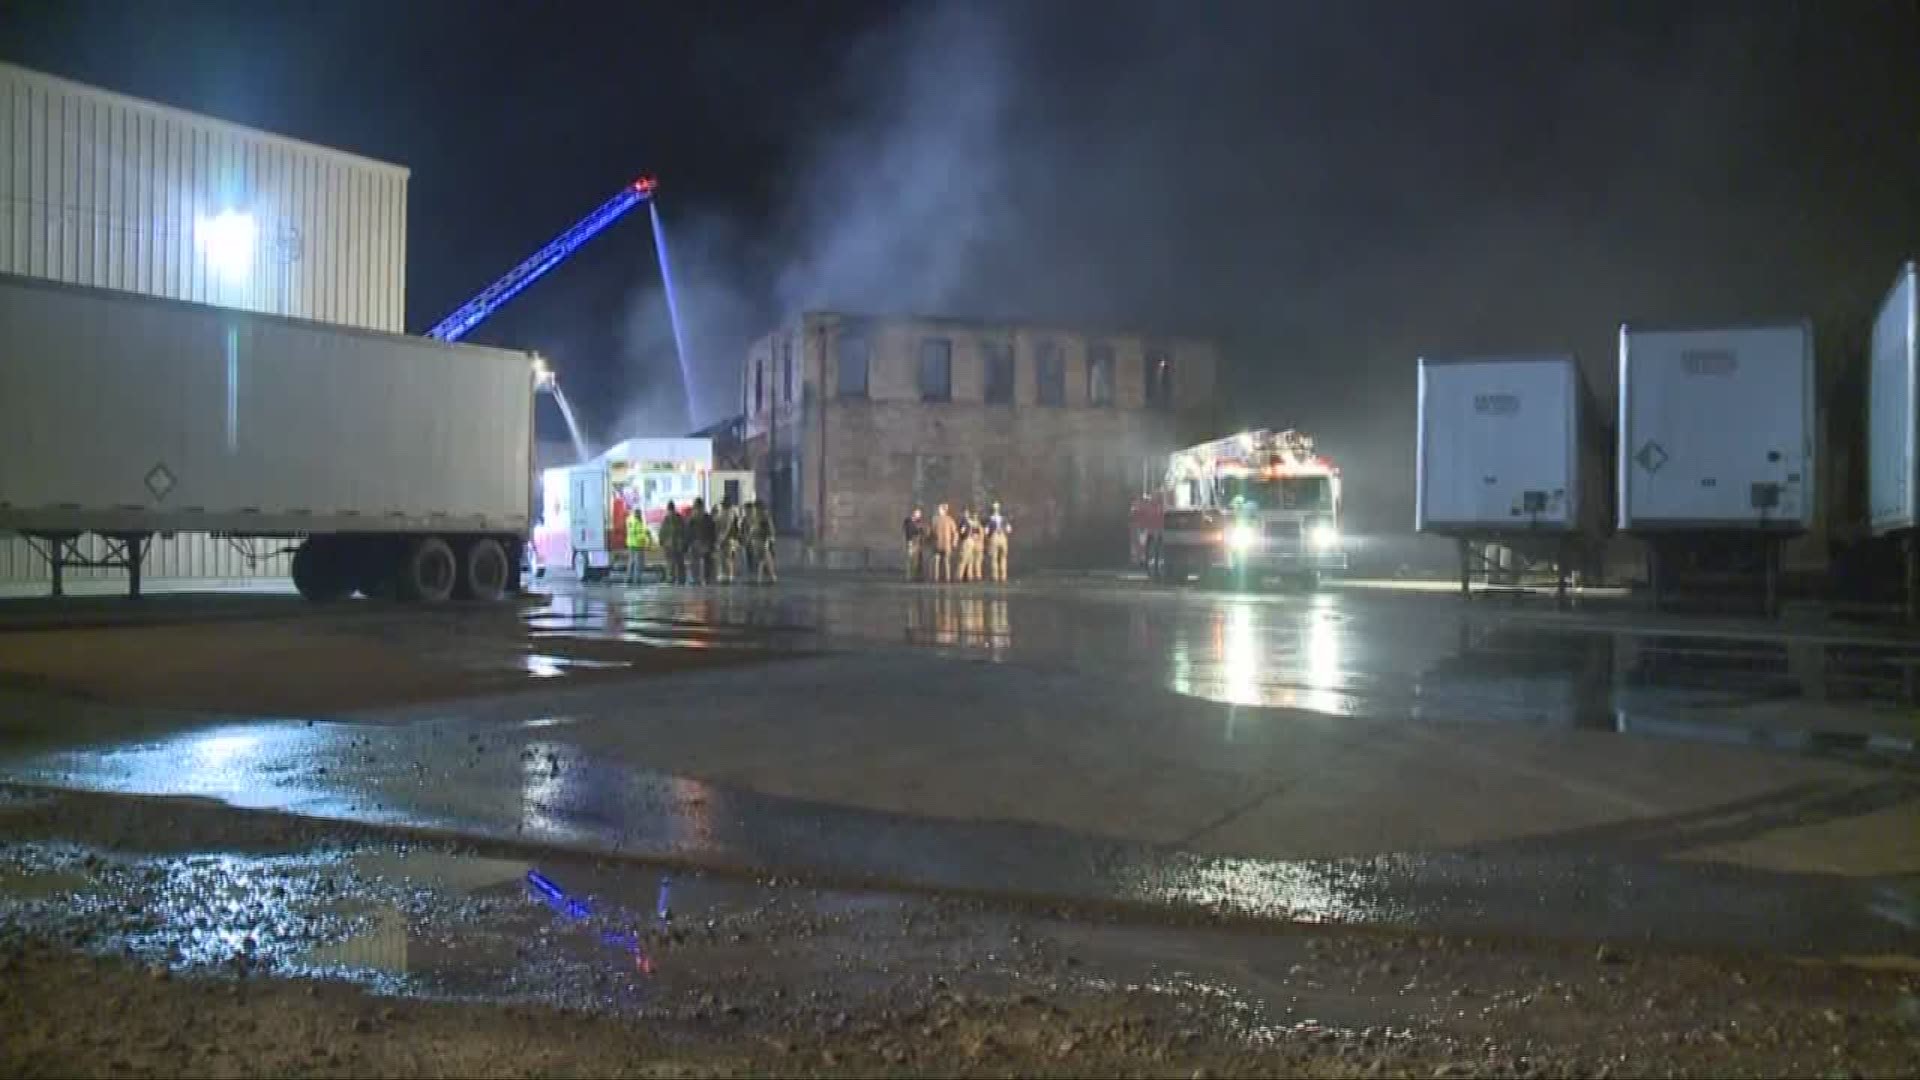 April 23, 2018: Crews worked throughout the night to put out a large fire in Canton. It started around 10 p.m. Sunday at the S. Slesnick Recycling Center on 3rd Street.